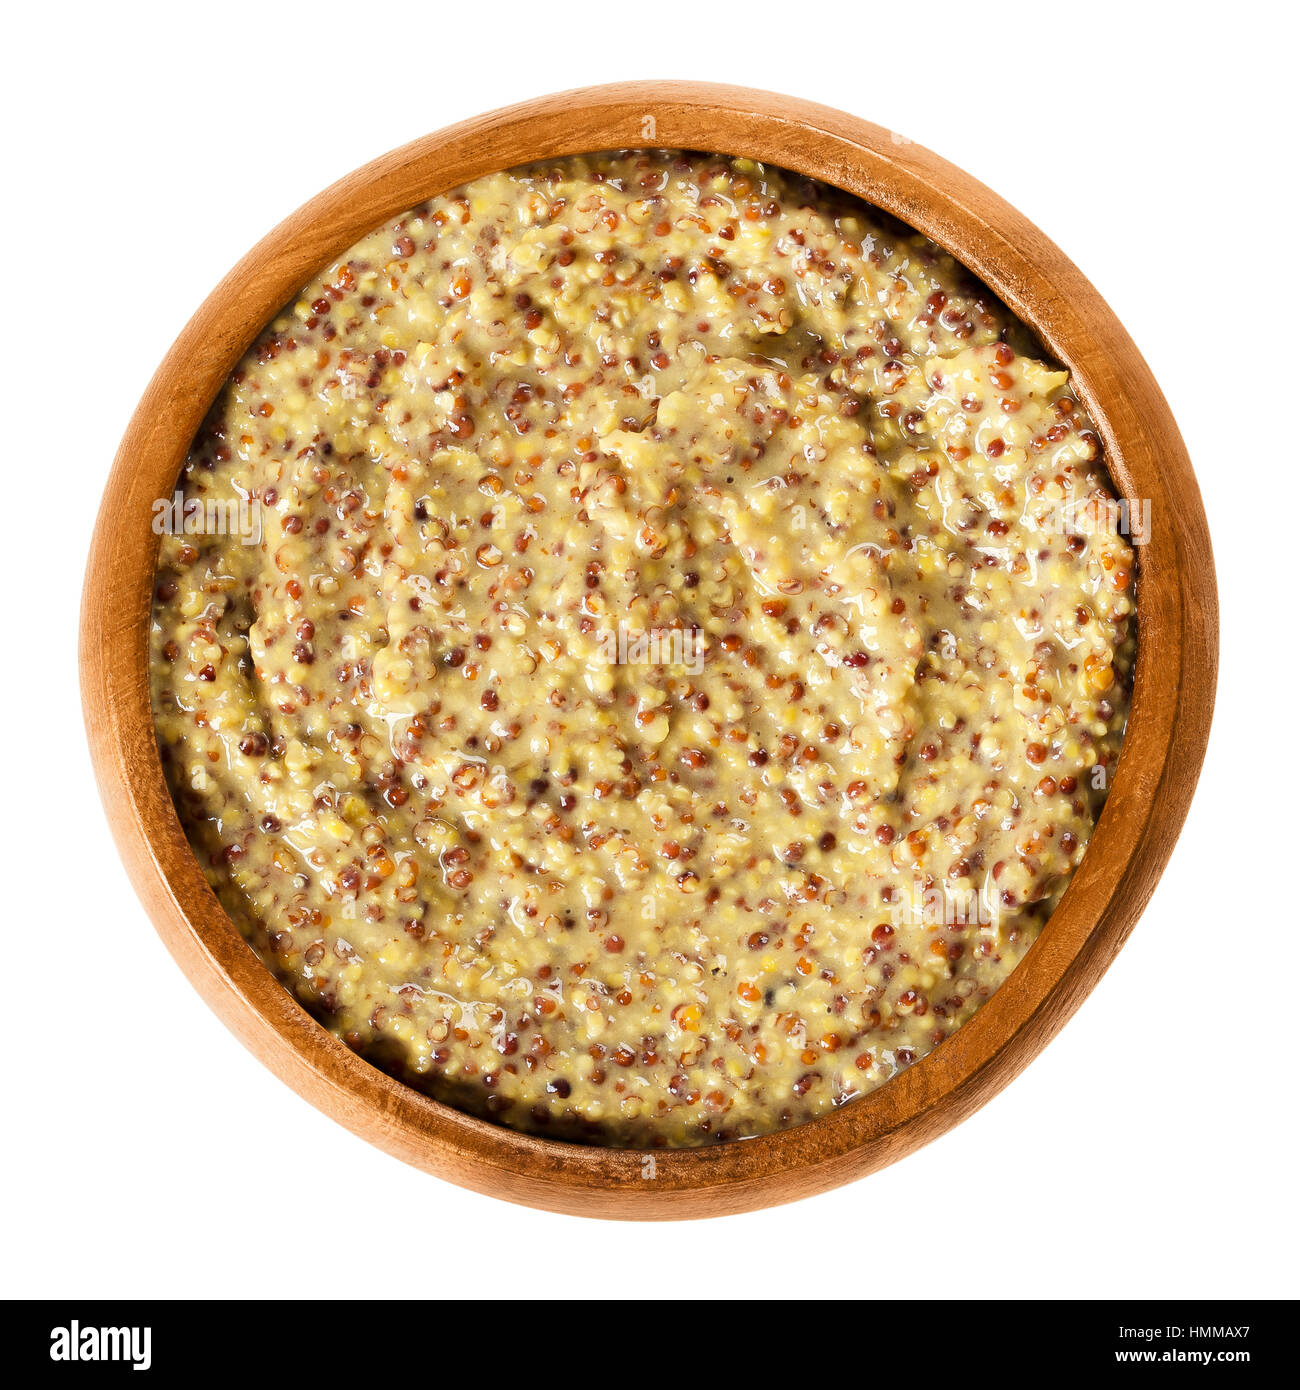 Whole grain Dijon mustard in wooden bowl with brown seeds. Traditional mustard named after the town of Dijon in Burgundy, France. Stock Photo